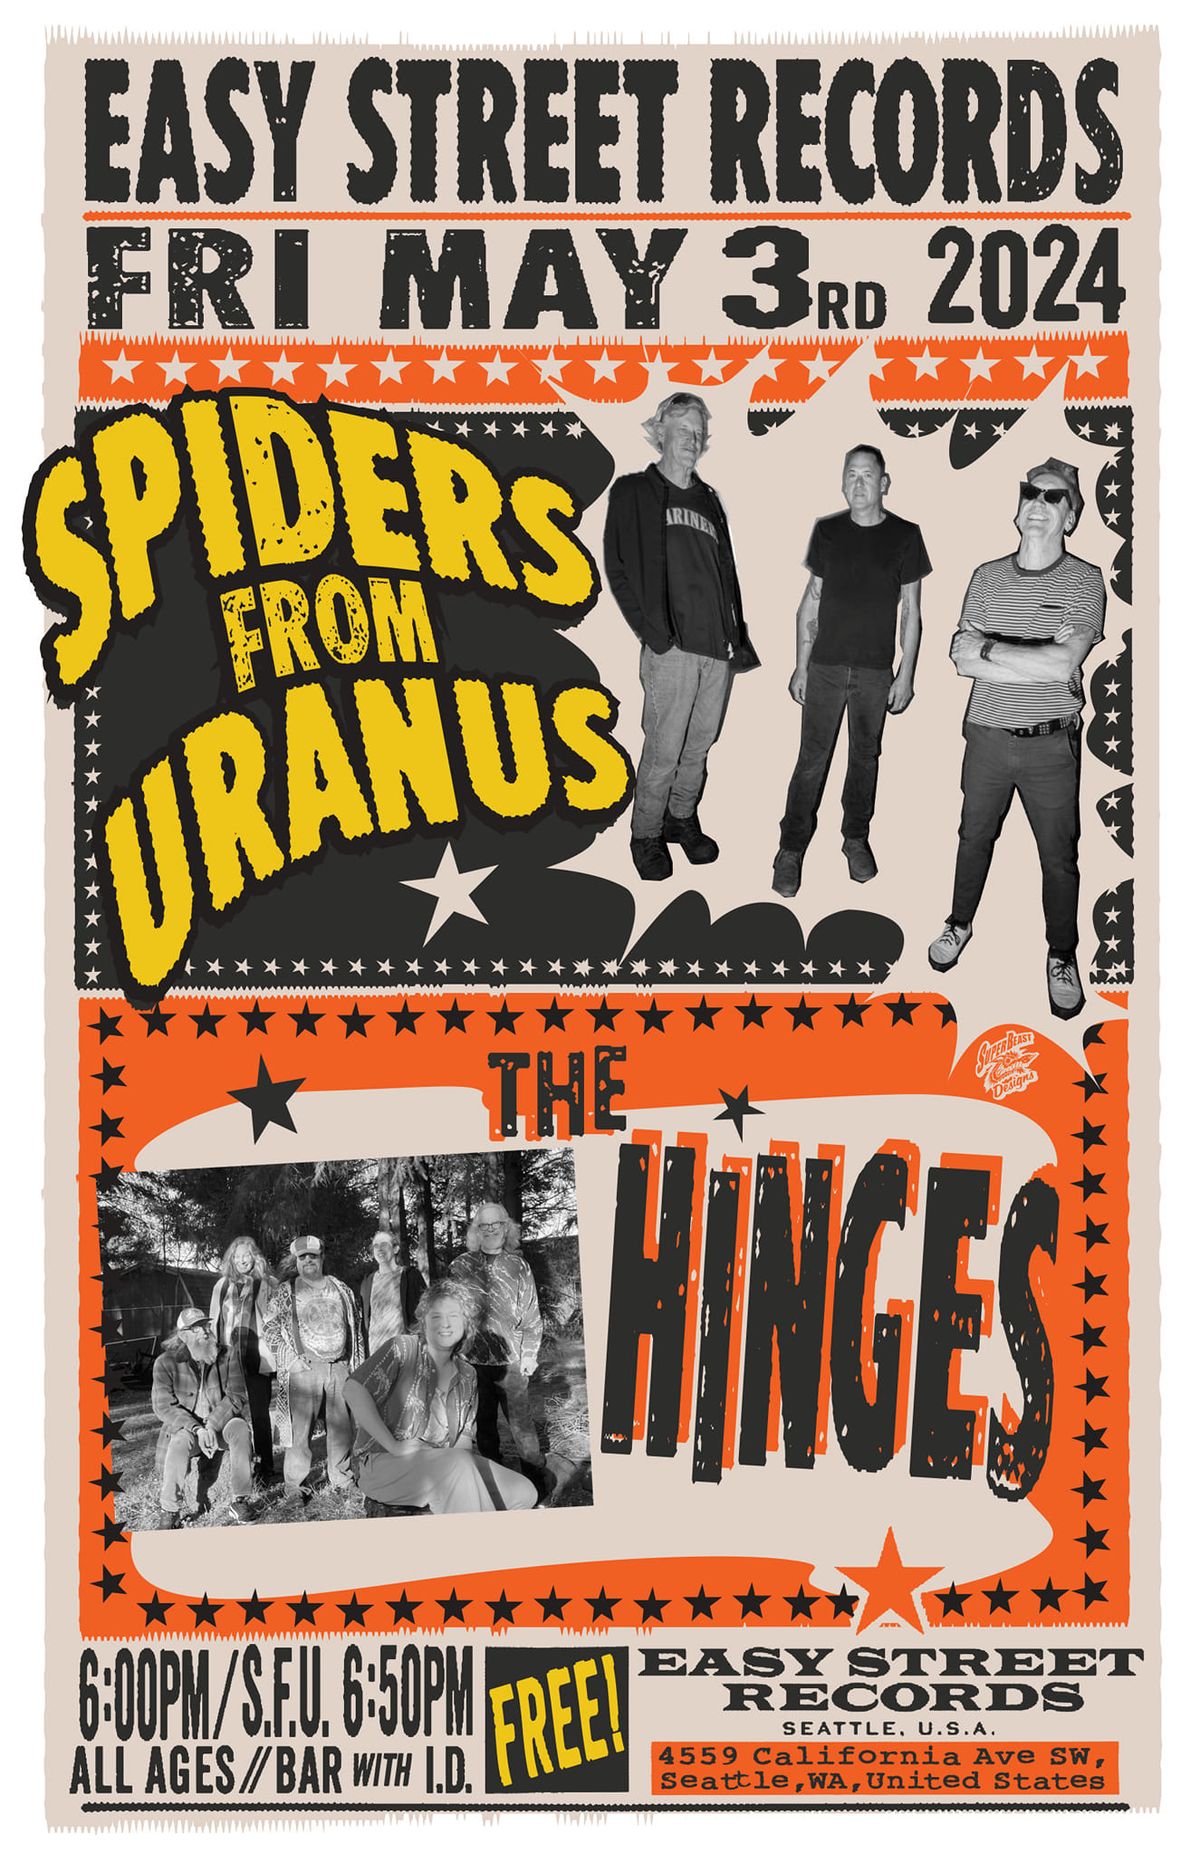 Spiders from Uranus & The Hinges @ Easy Street Records